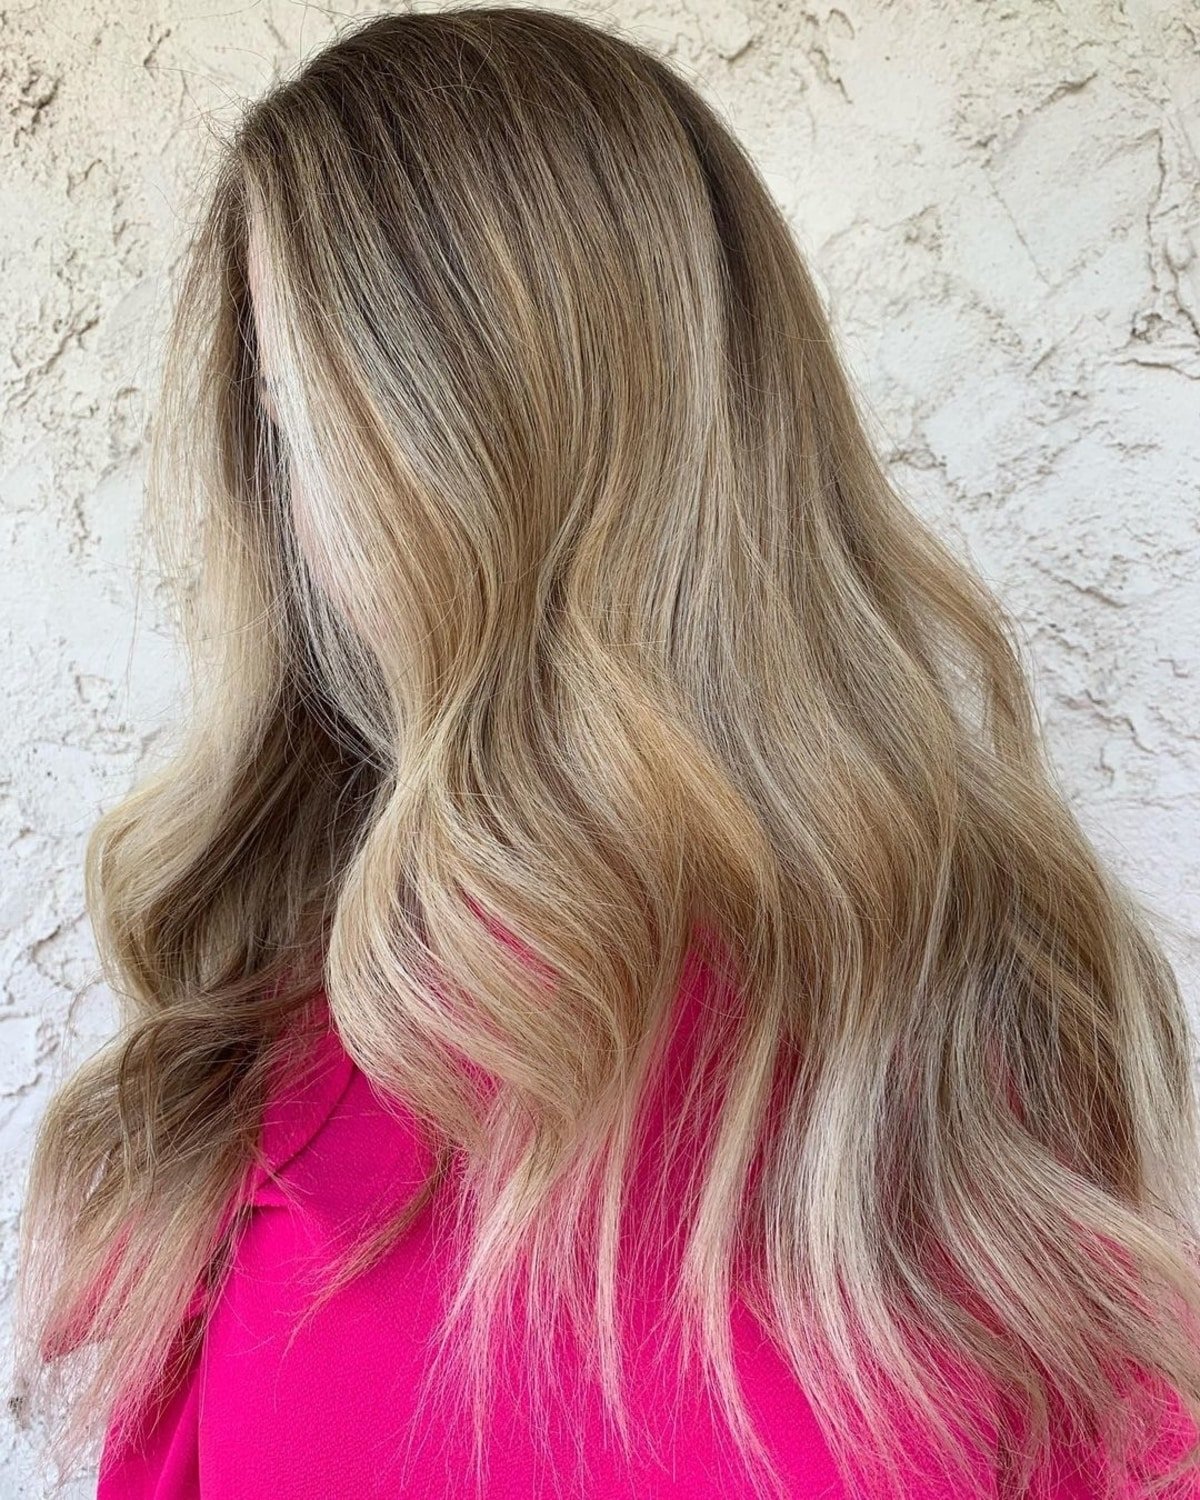 Cool blonde highlights with dark roots